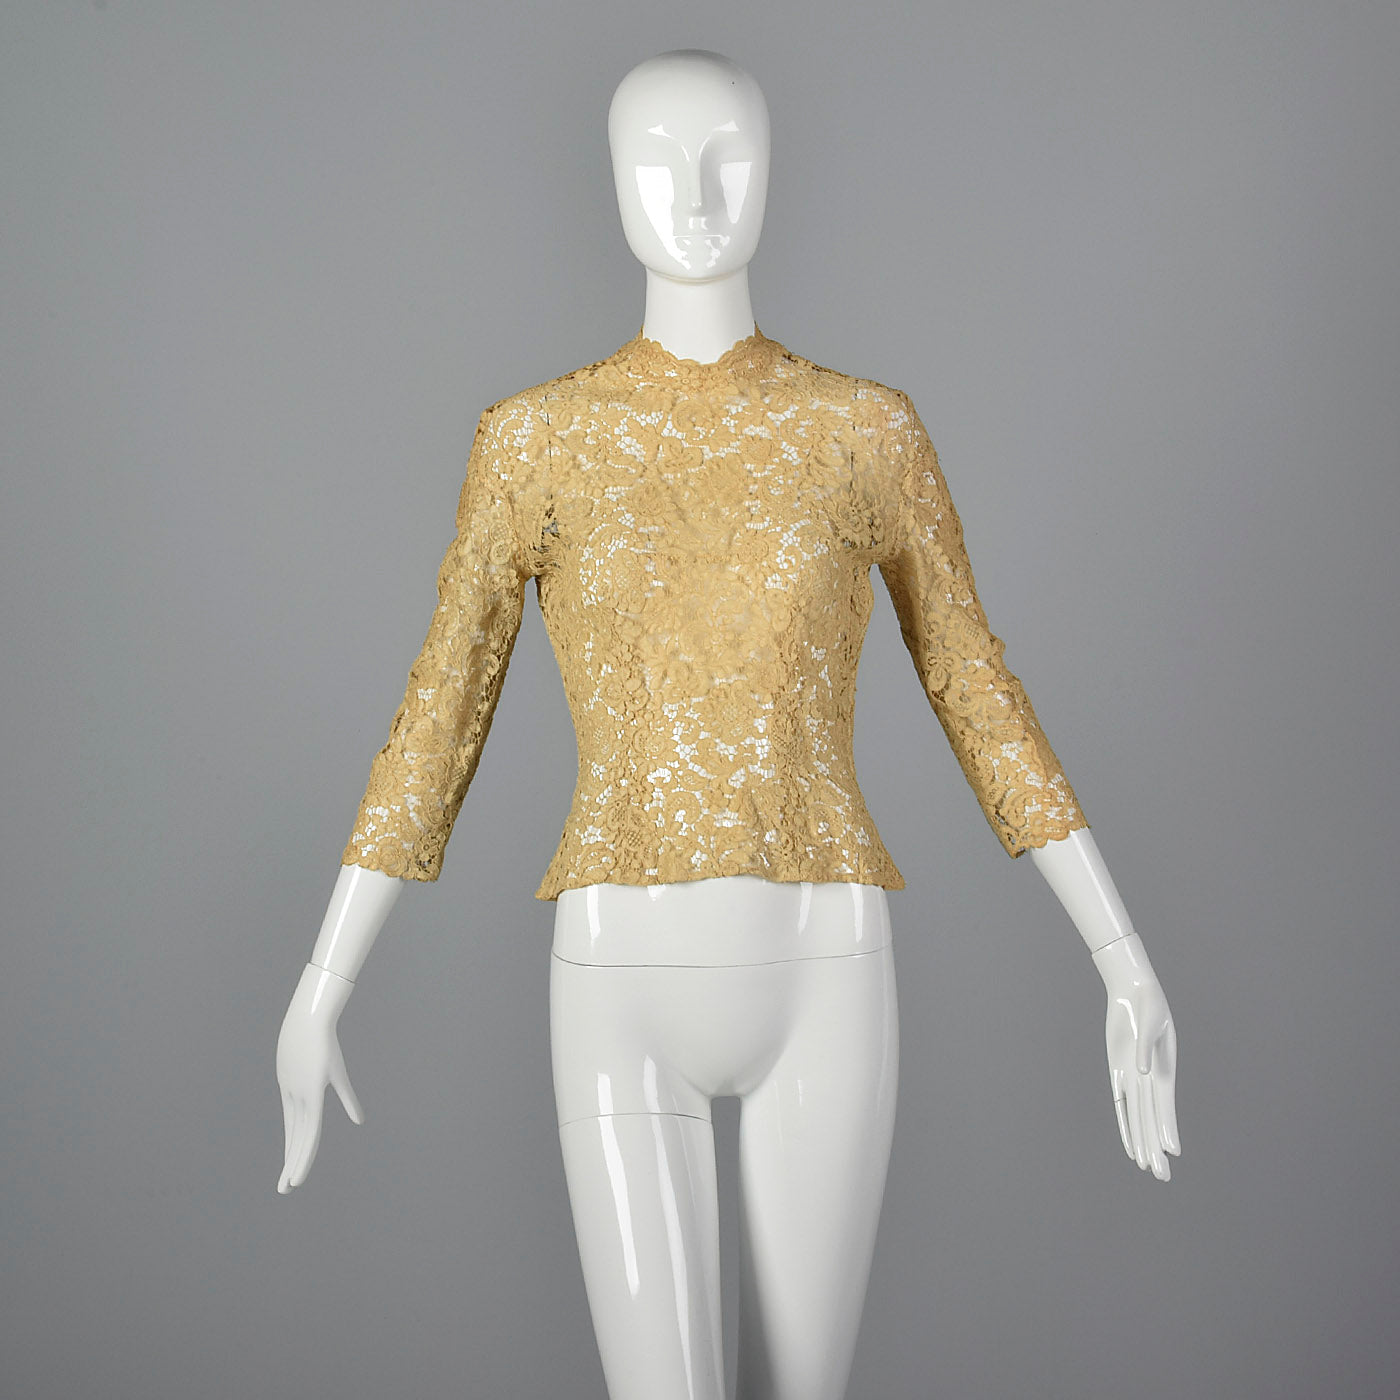 1950s Cream Lace Top with Side Zip